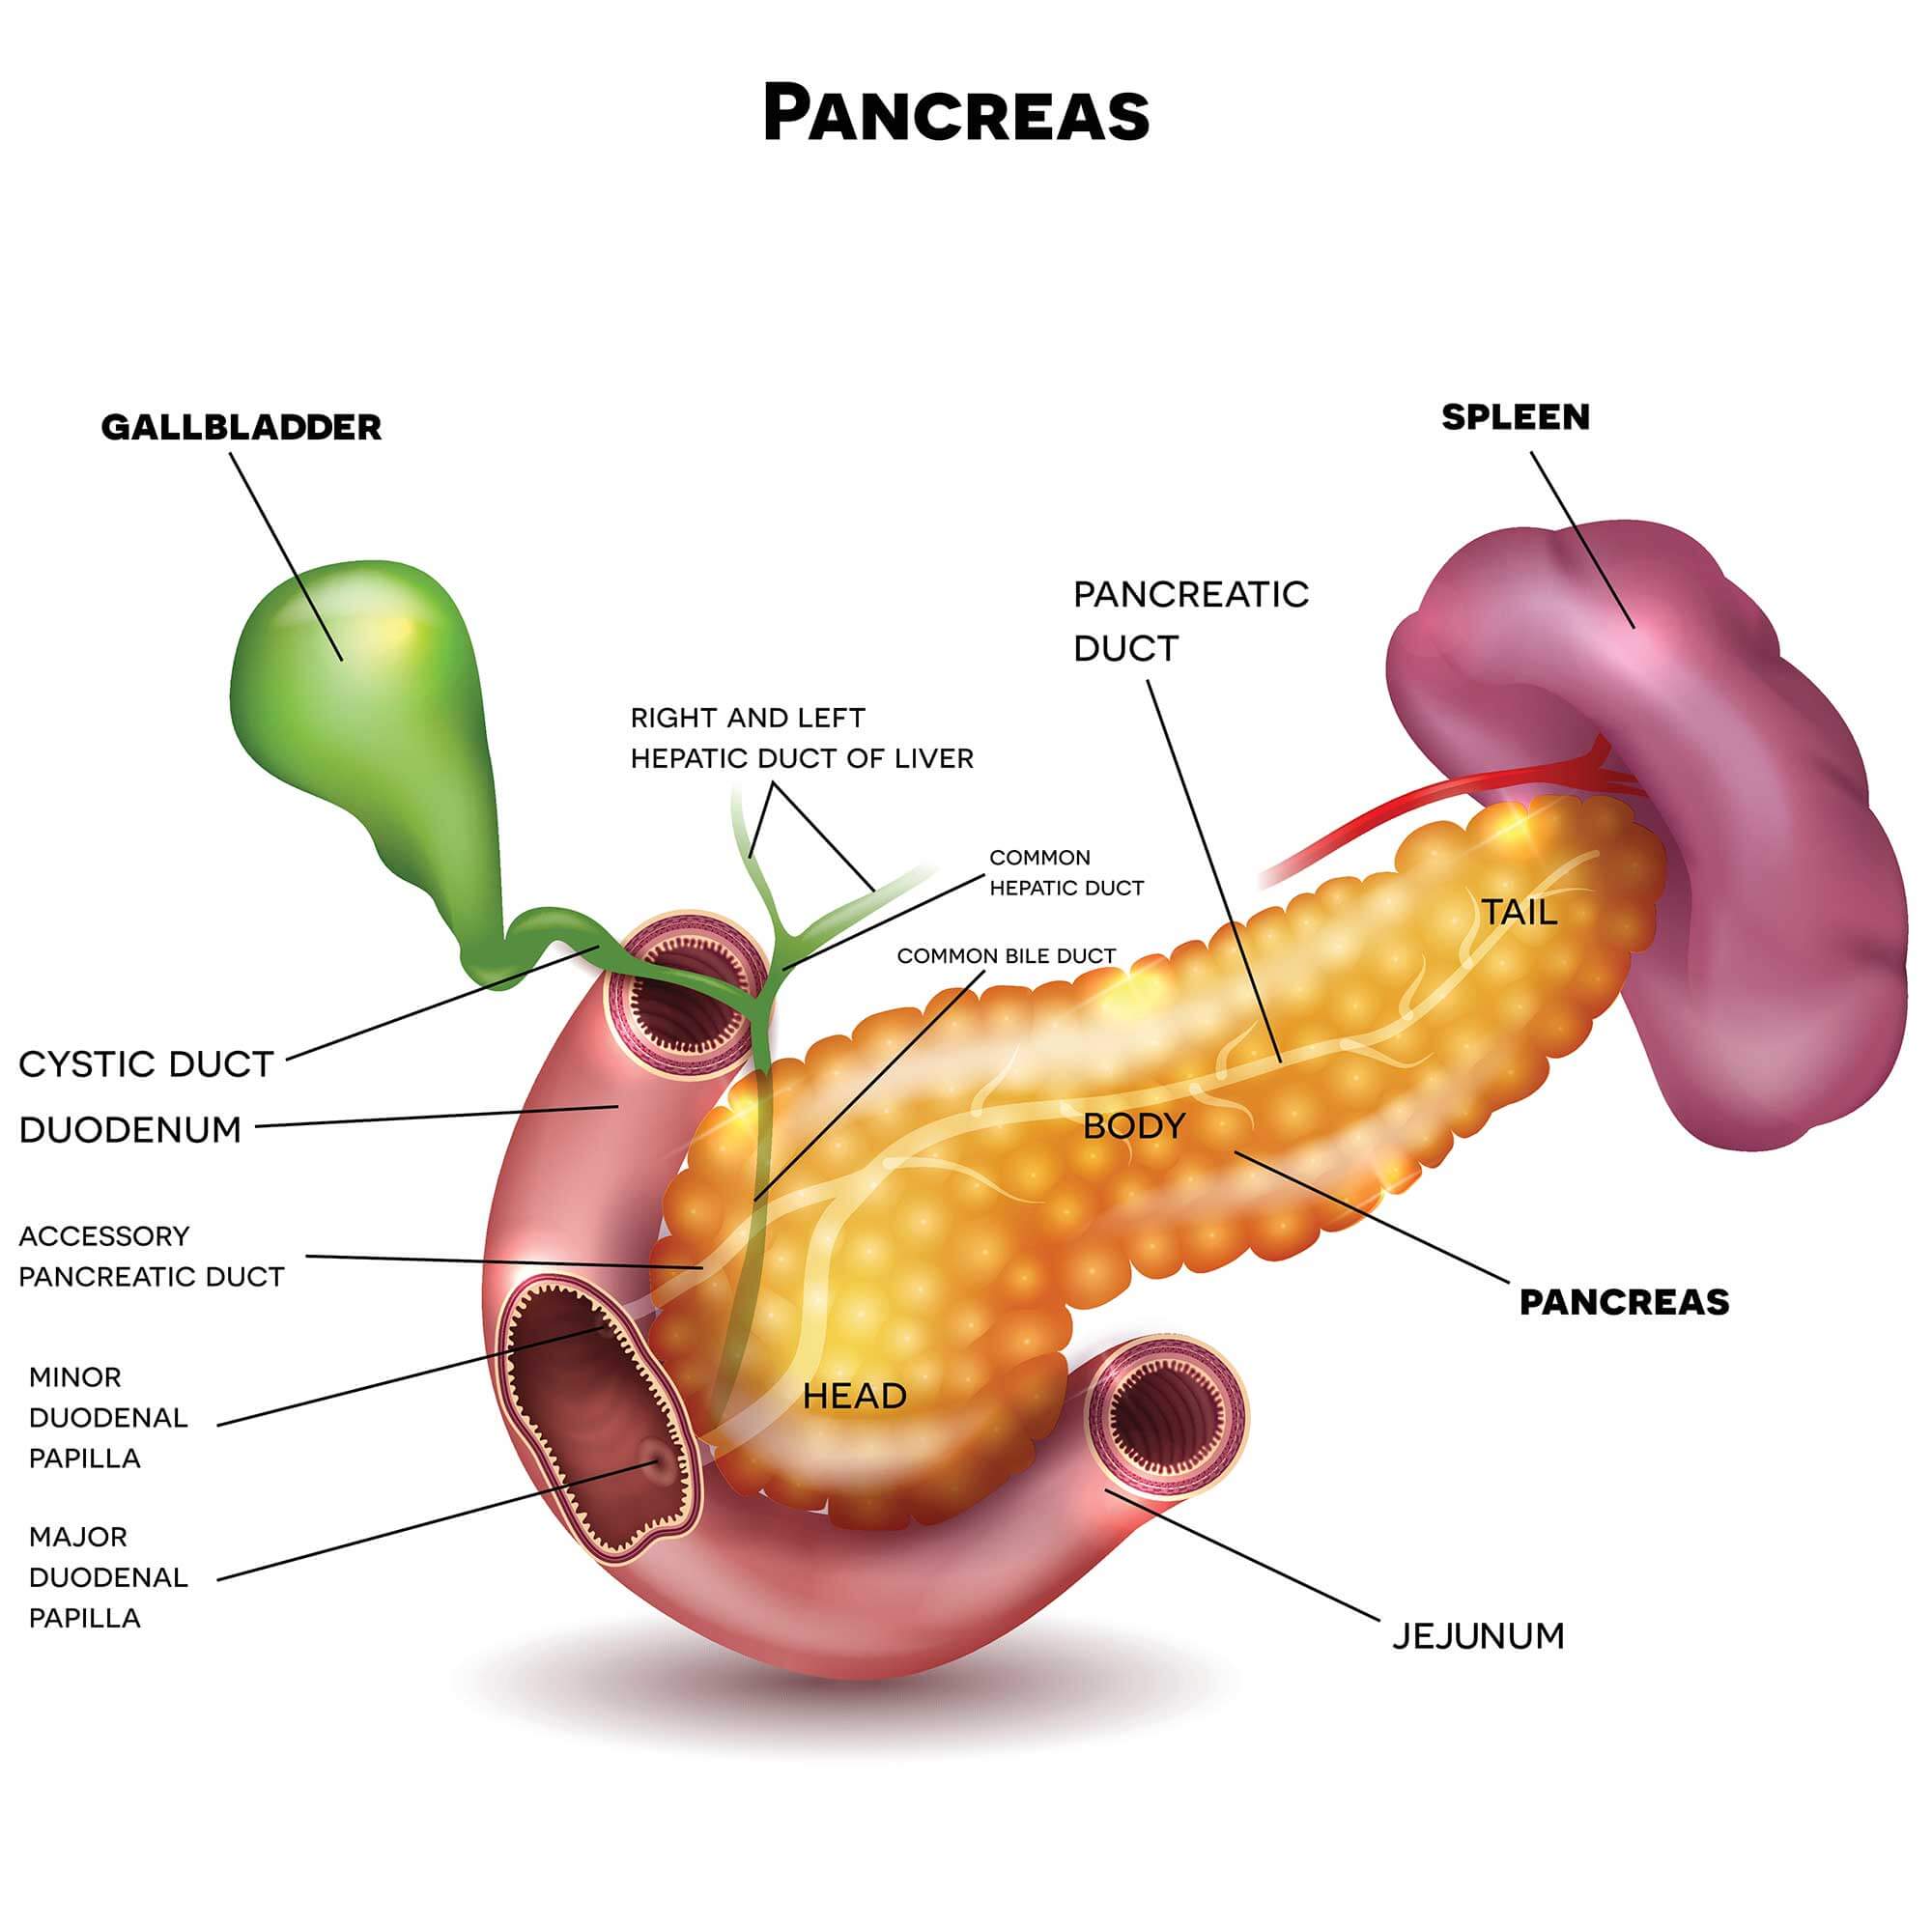 how quickly does pancreatitis develop